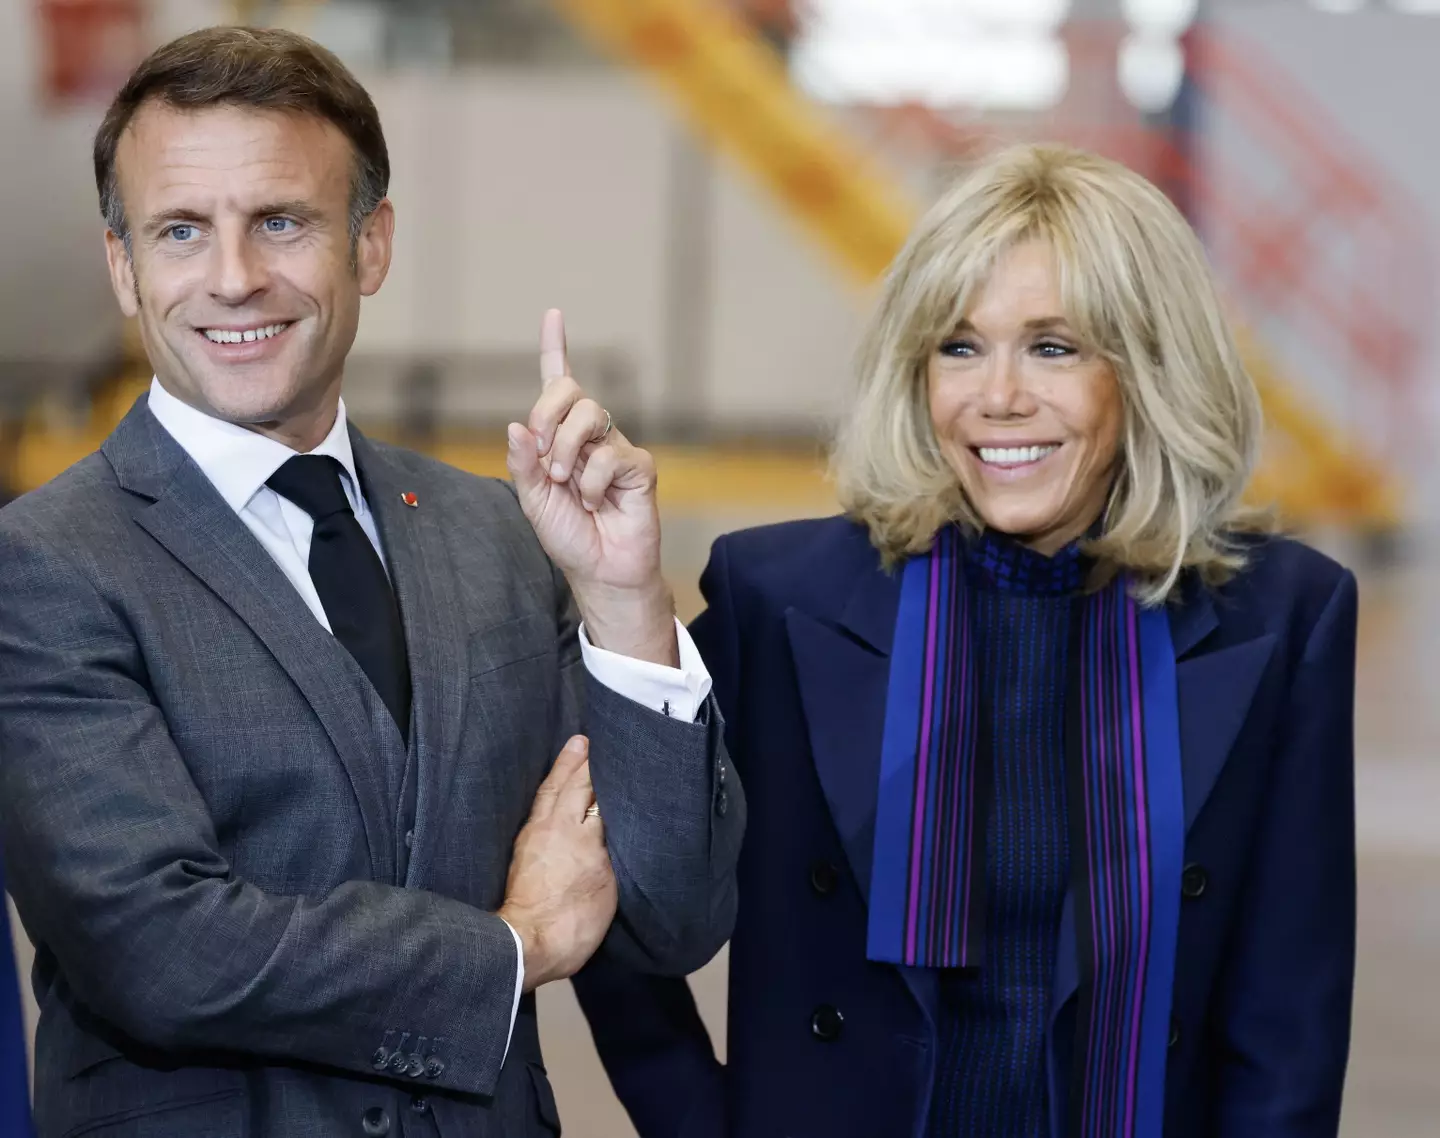 Brigitte Macron started dating future President, Emmanuel Macron when she was 40 and he was just 15 years old, a new interview reveals.